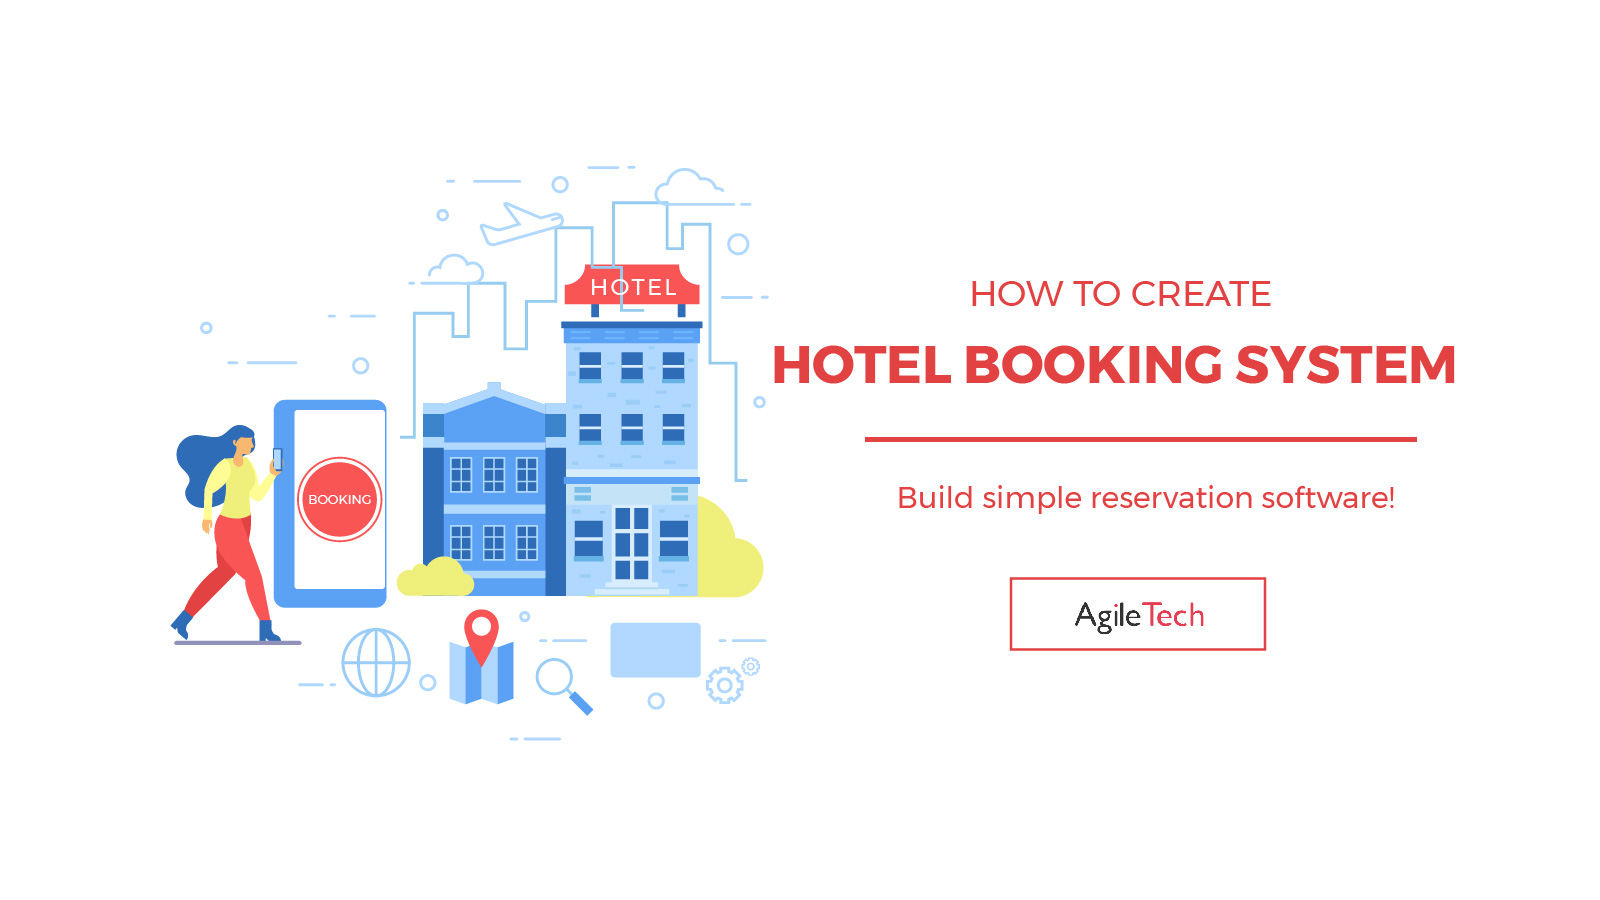 how to create hotel booking system, online booking system, hotel booking software, booking engine, agiletech luxstay